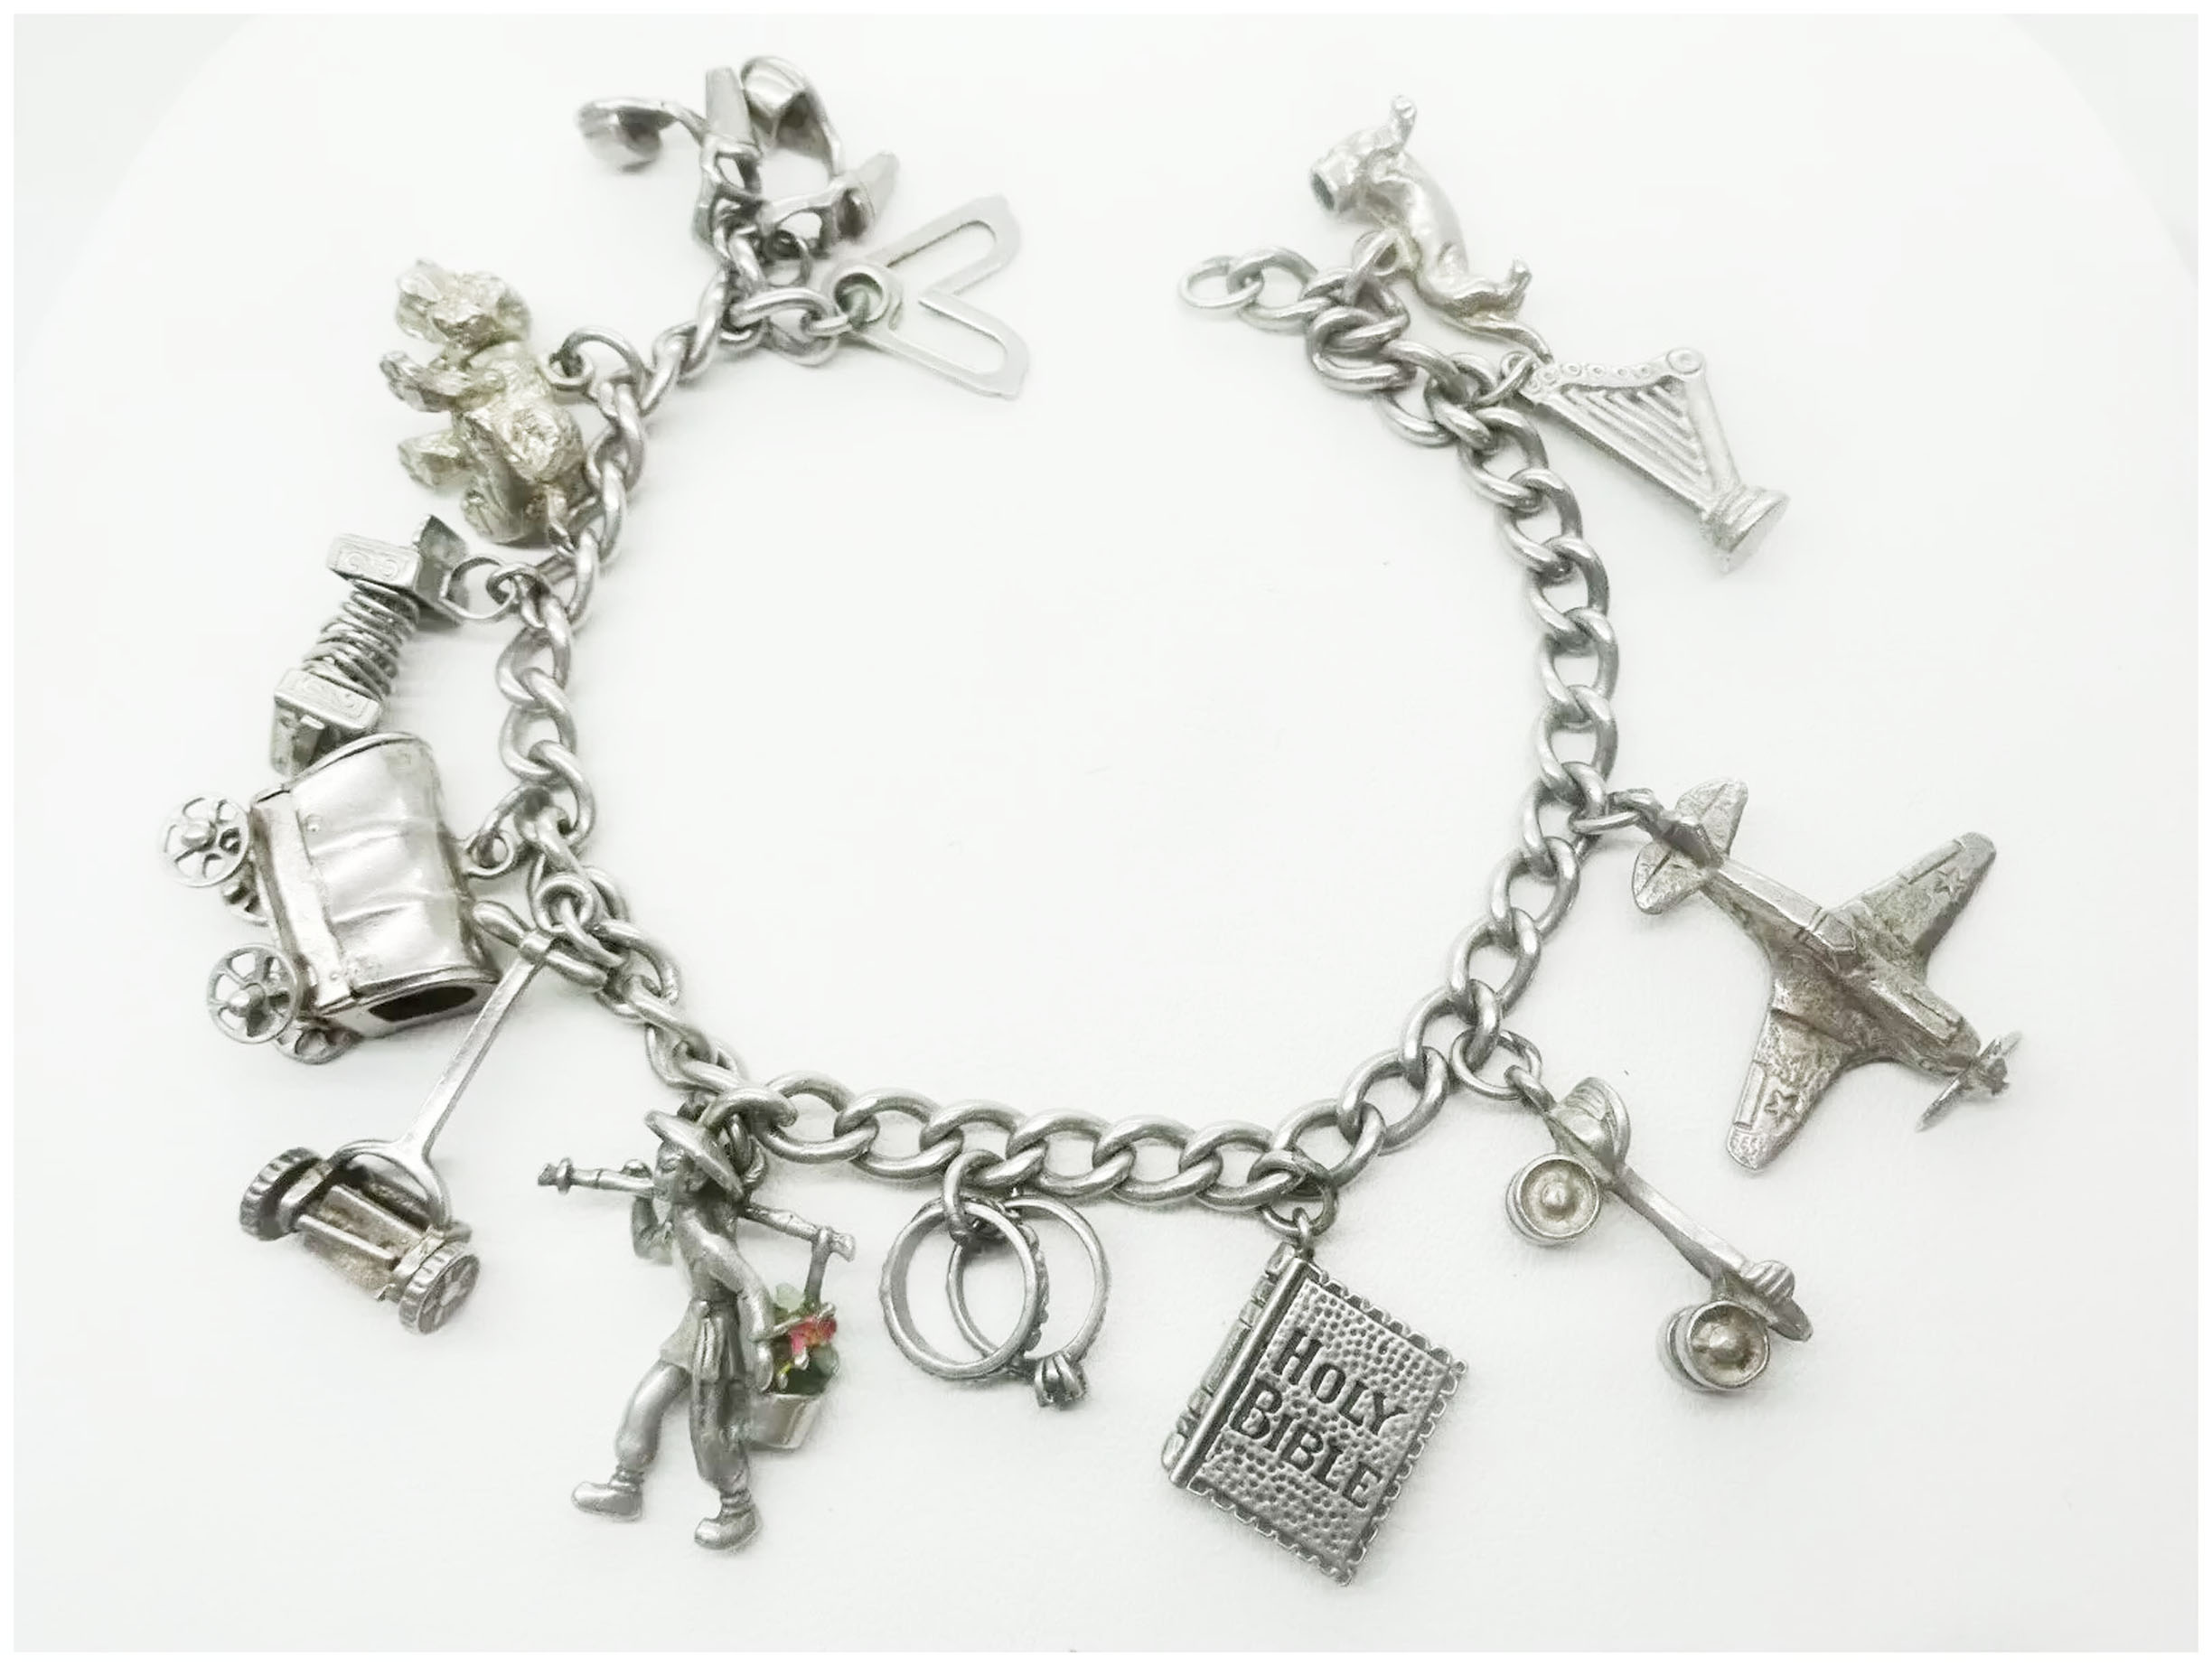 Unique Sterling Silver Charm Bracelet with 27 Charms